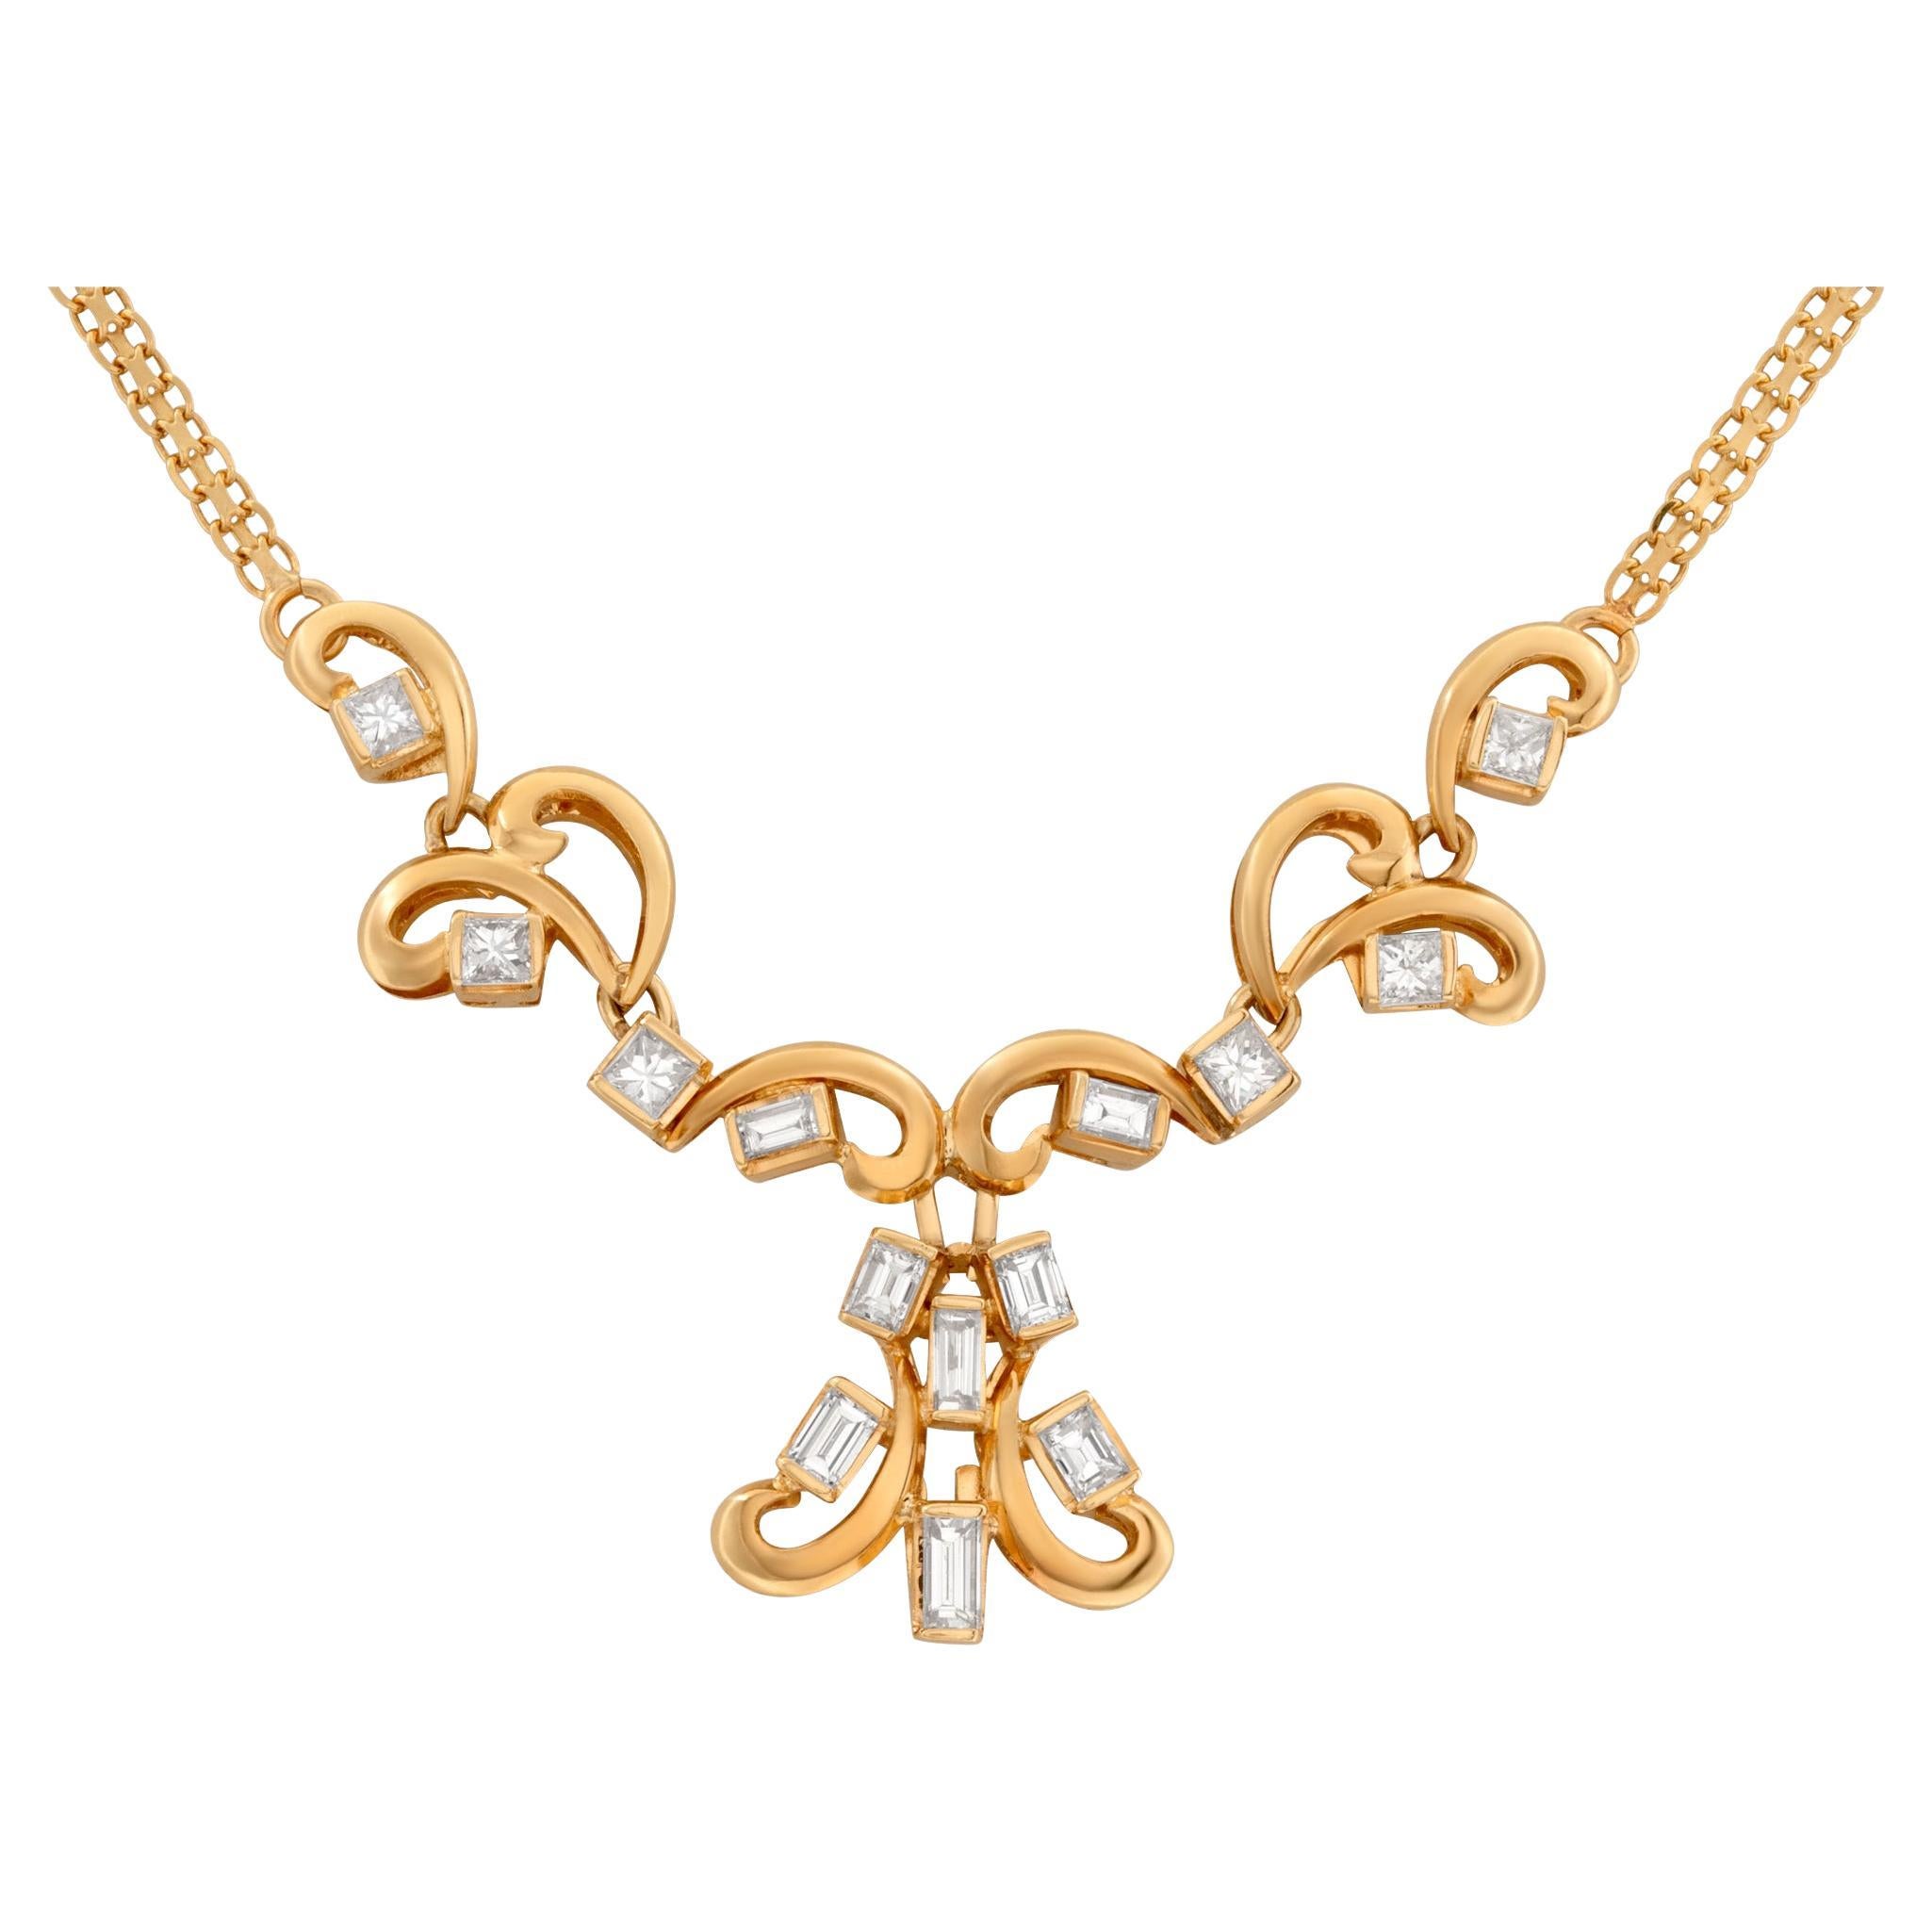 Swirl diamond necklace in 18k yellow gold with over 2 carats